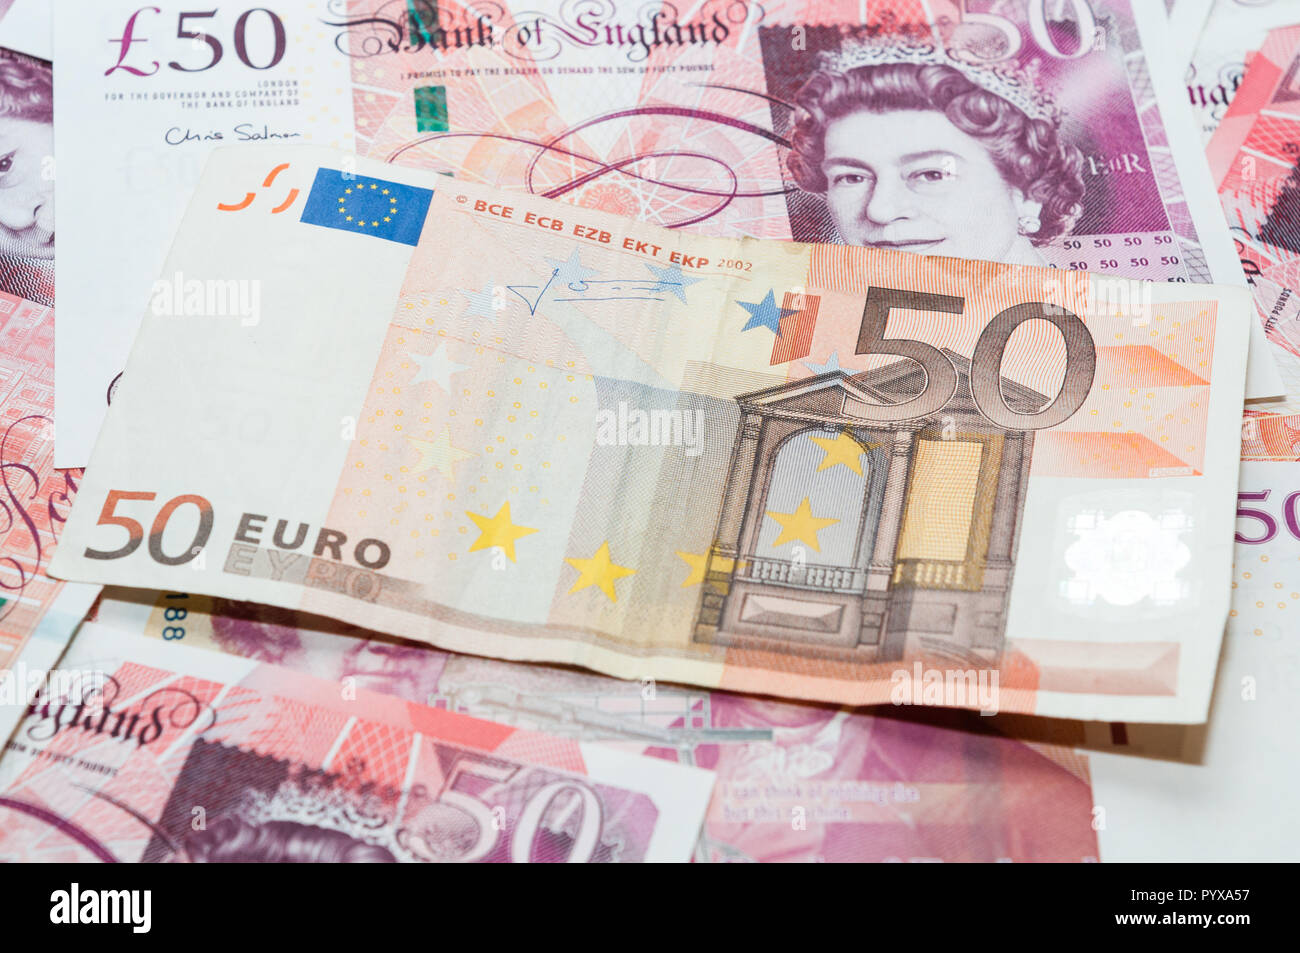 UK and EUR currency, 50 pounds and 50 euros Stock Photo